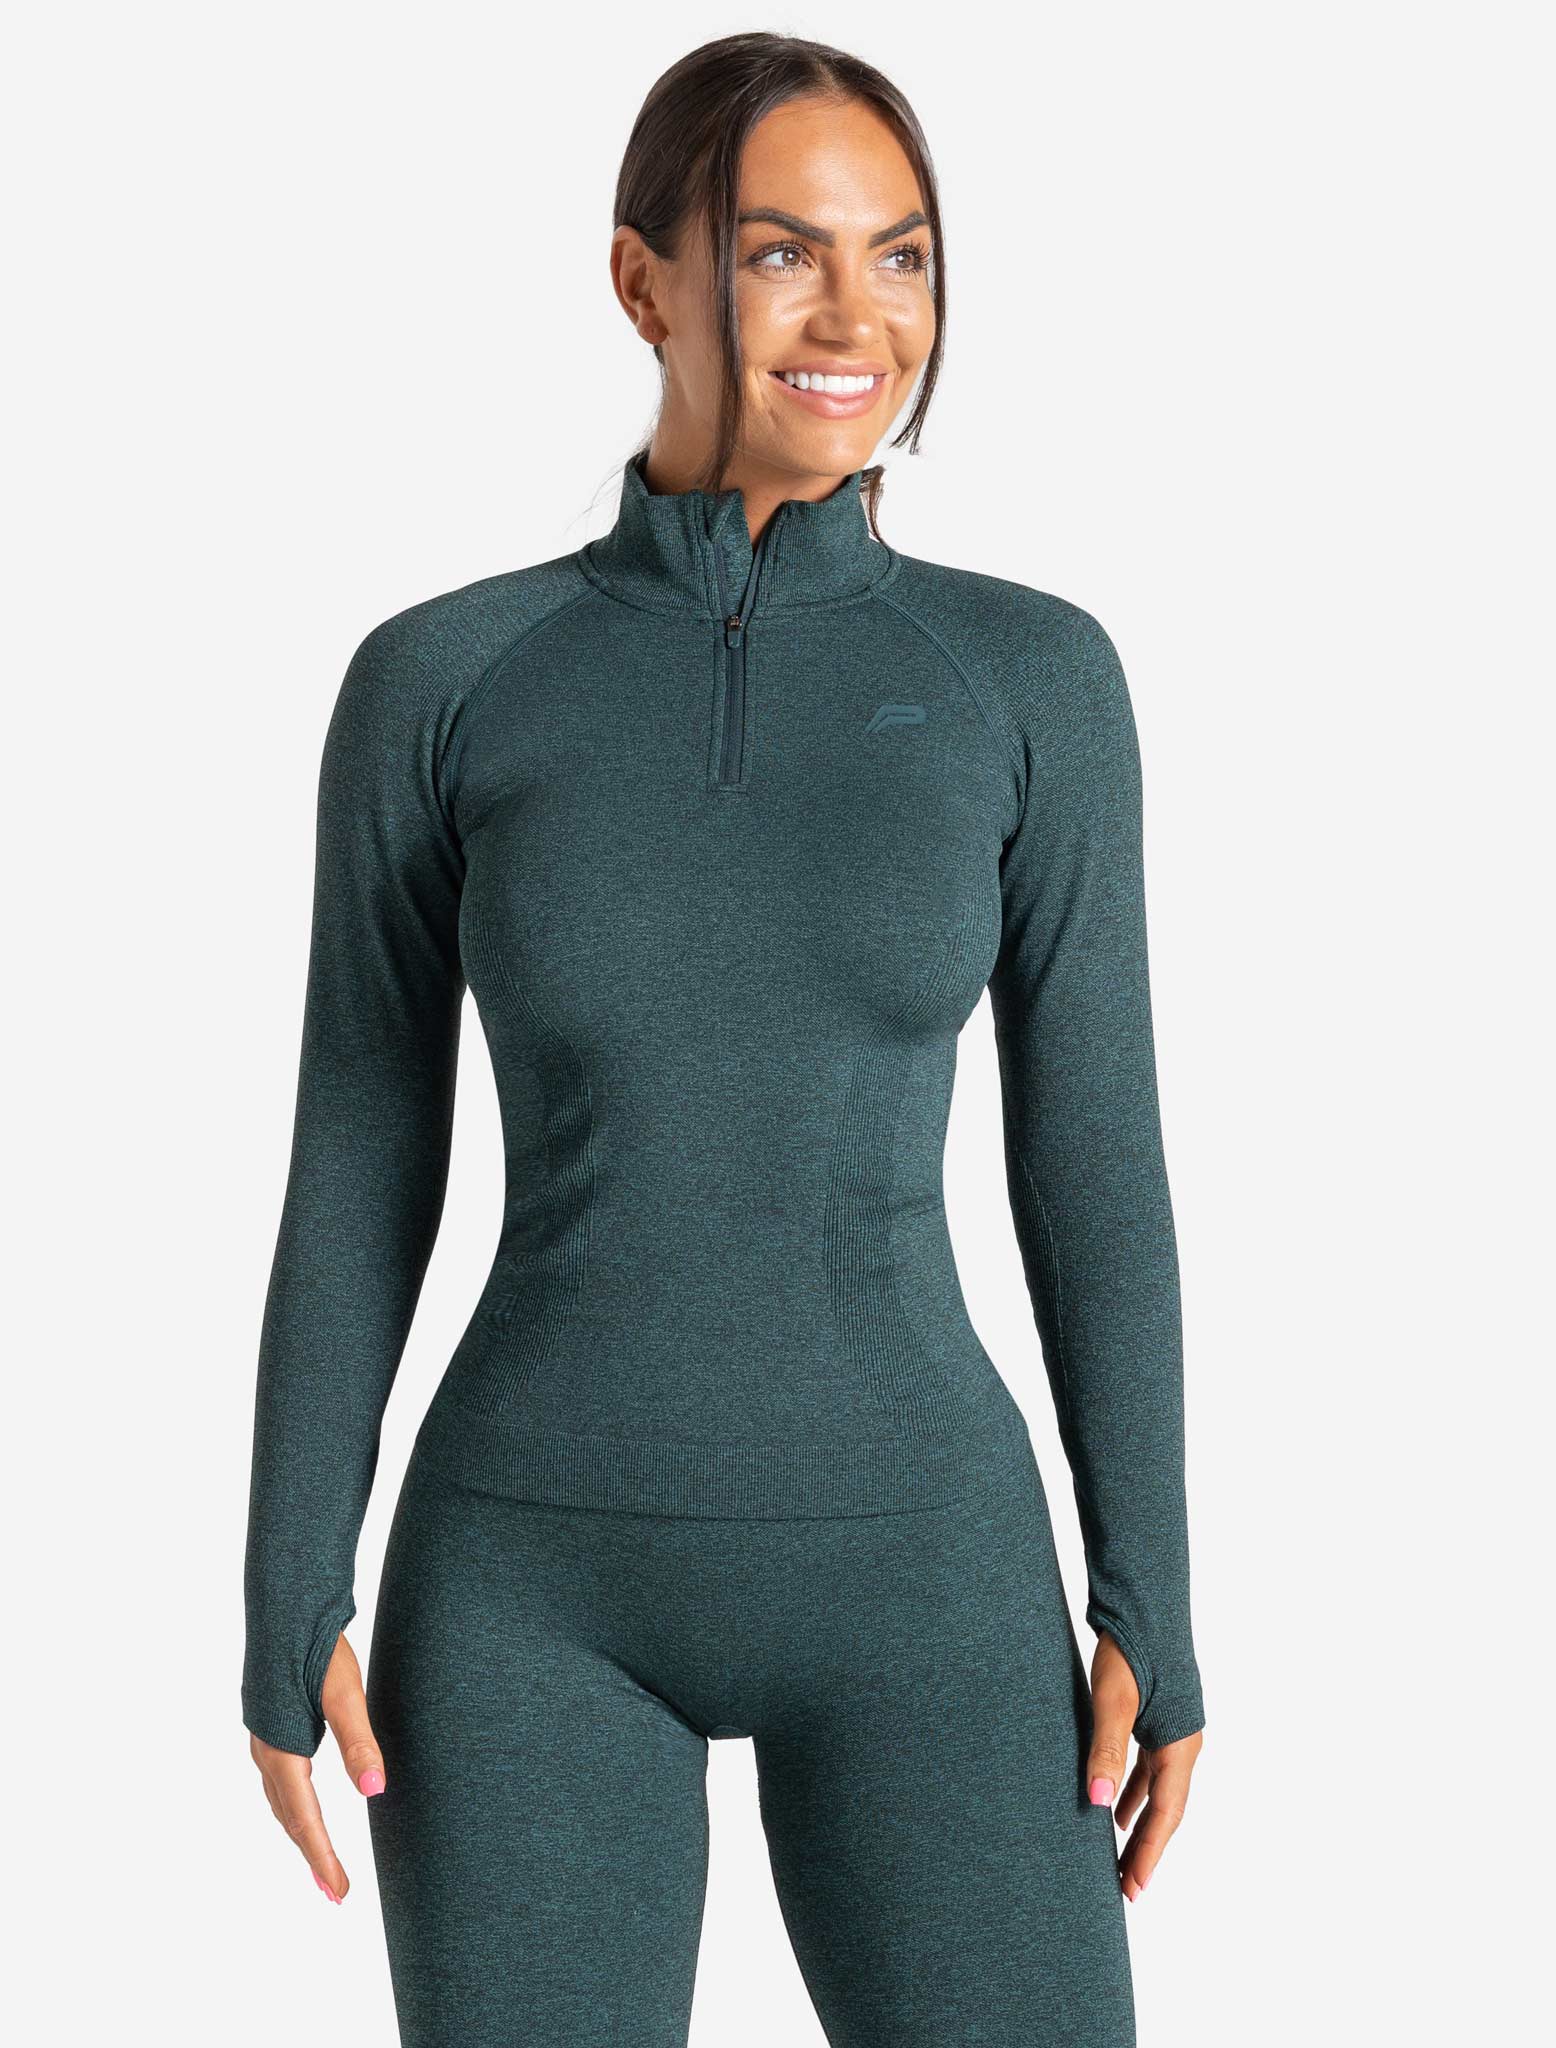 Core Seamless ¼ Zip / Teal Marl Pursue Fitness 1